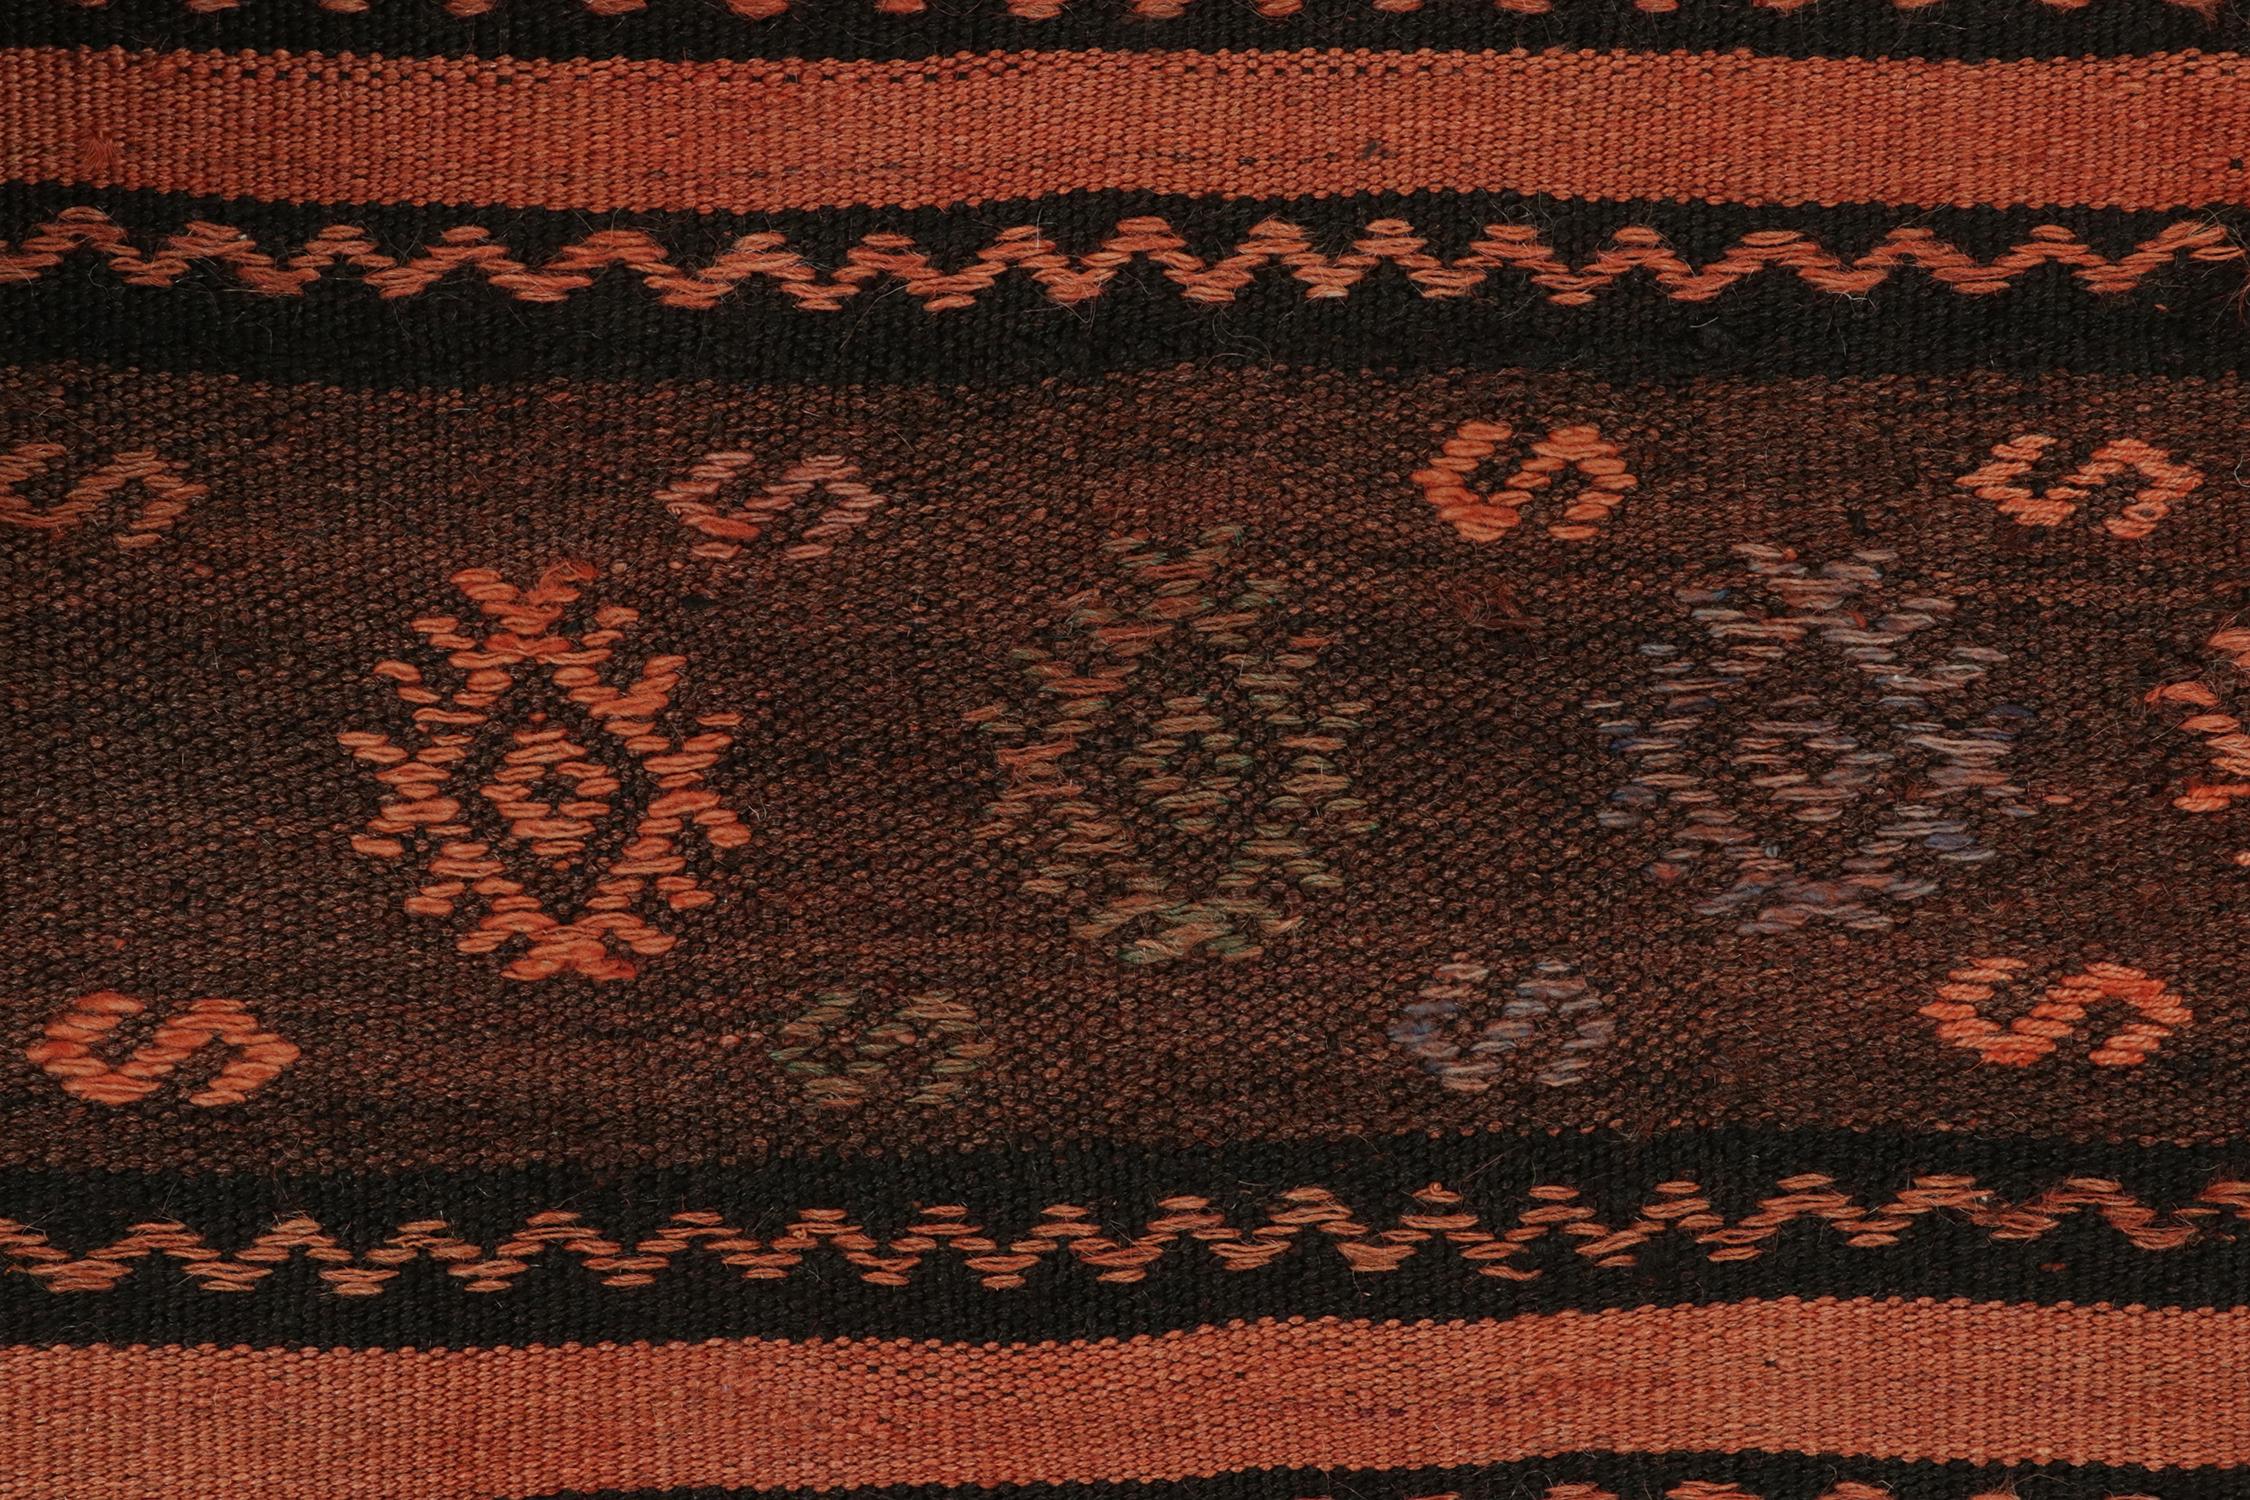 Vintage Gallery-Sized Kilim in Orange and Black Stripes Patterns by Rug & Kilim In Good Condition For Sale In Long Island City, NY